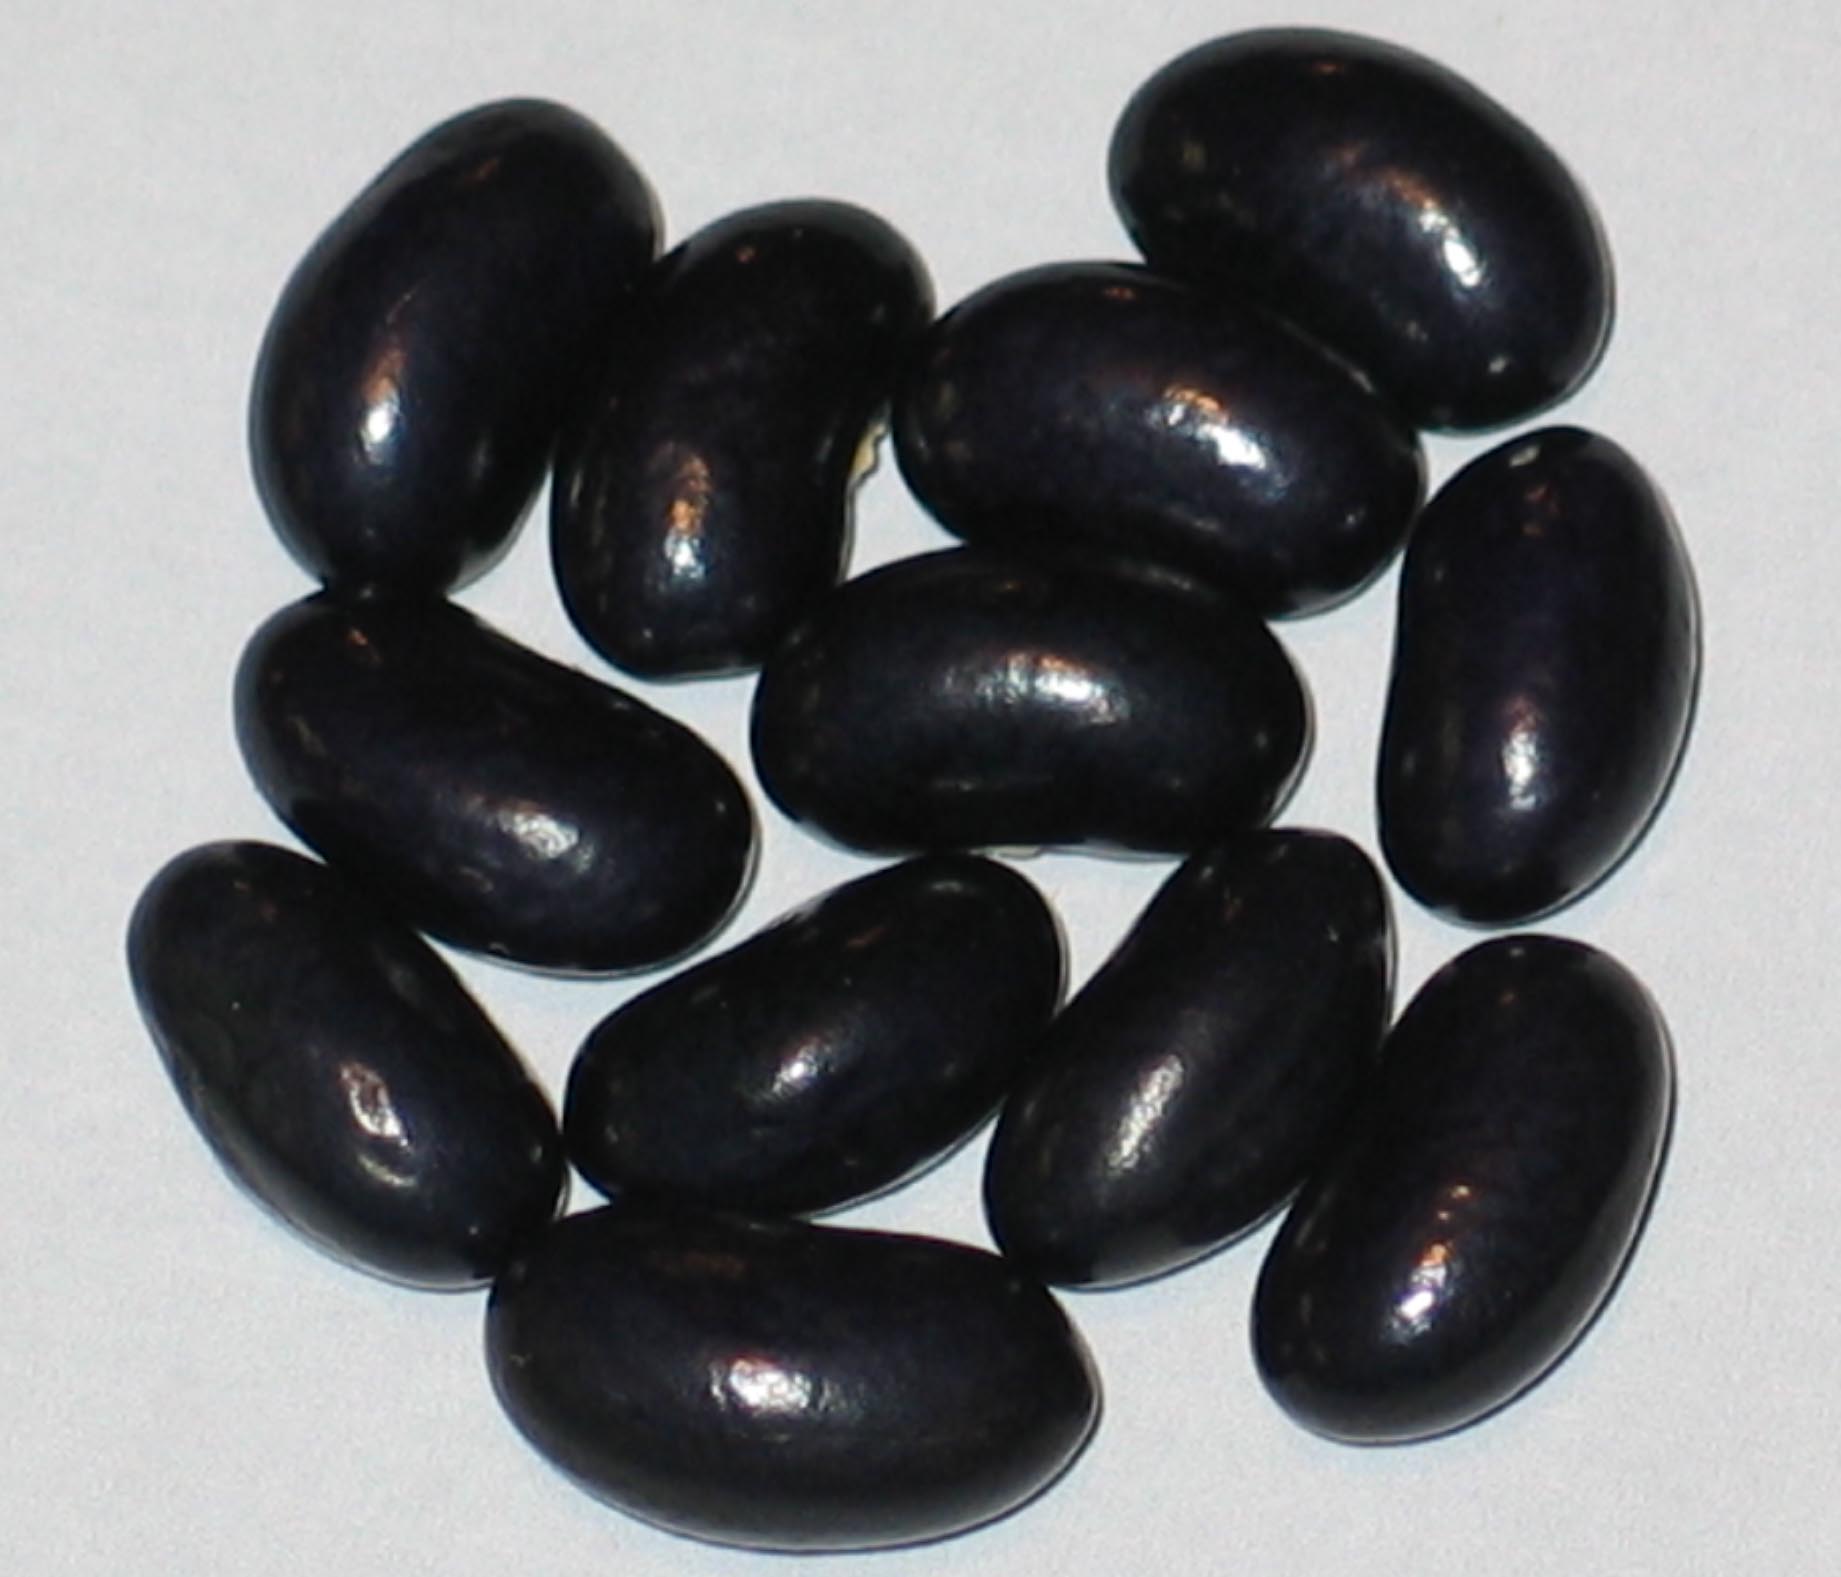 image of Rosa's beans